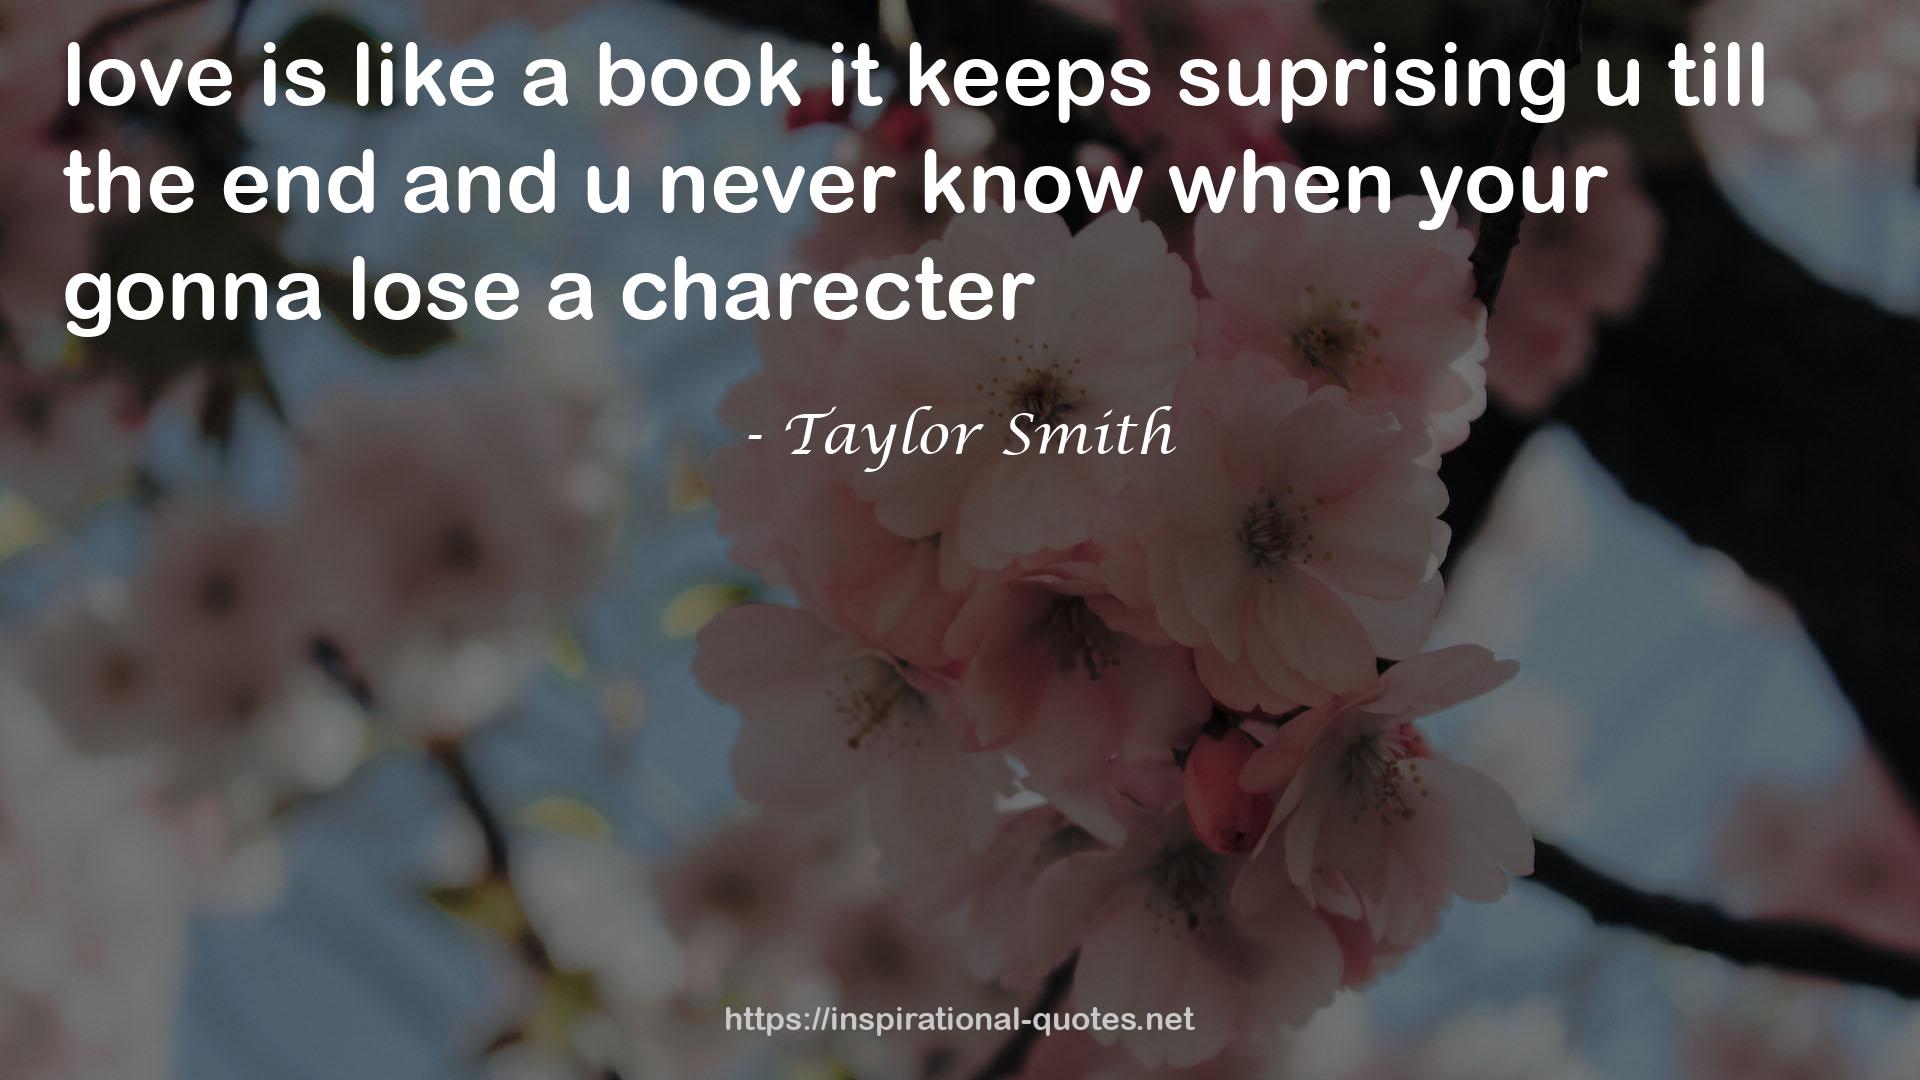 Taylor Smith QUOTES